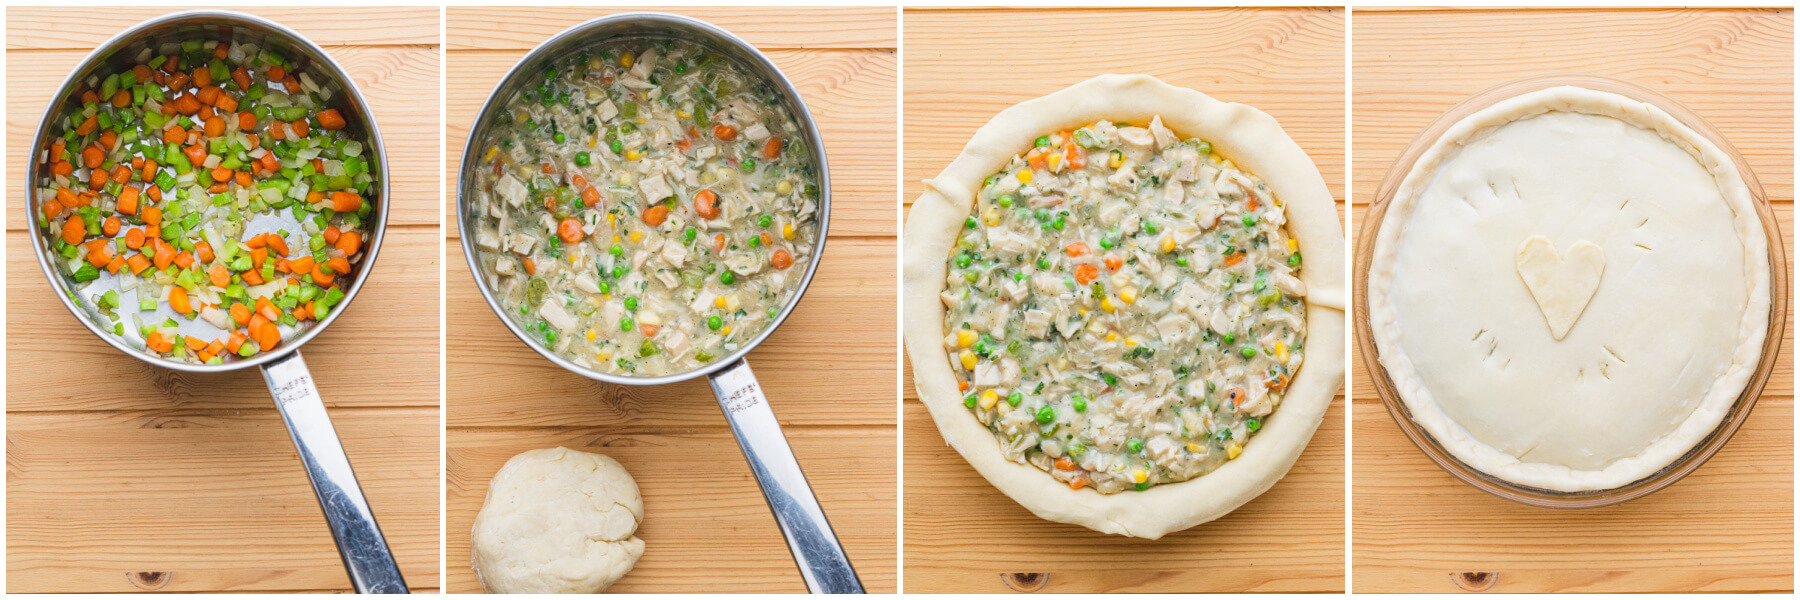 Process shots showing how to make filling and fill pastry with turkey vegetable filling.